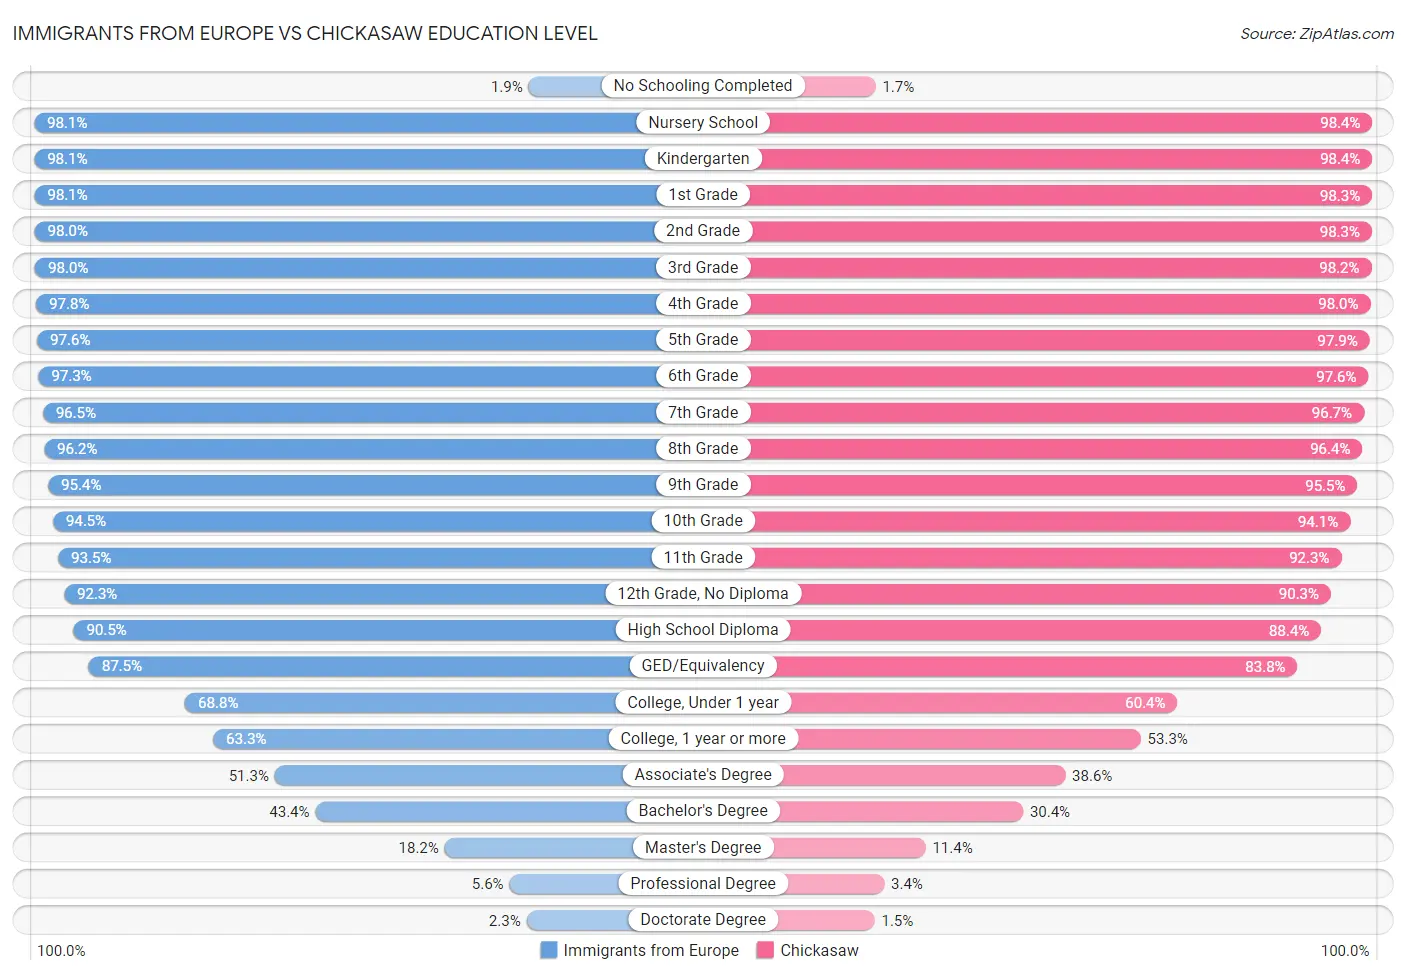 Immigrants from Europe vs Chickasaw Education Level